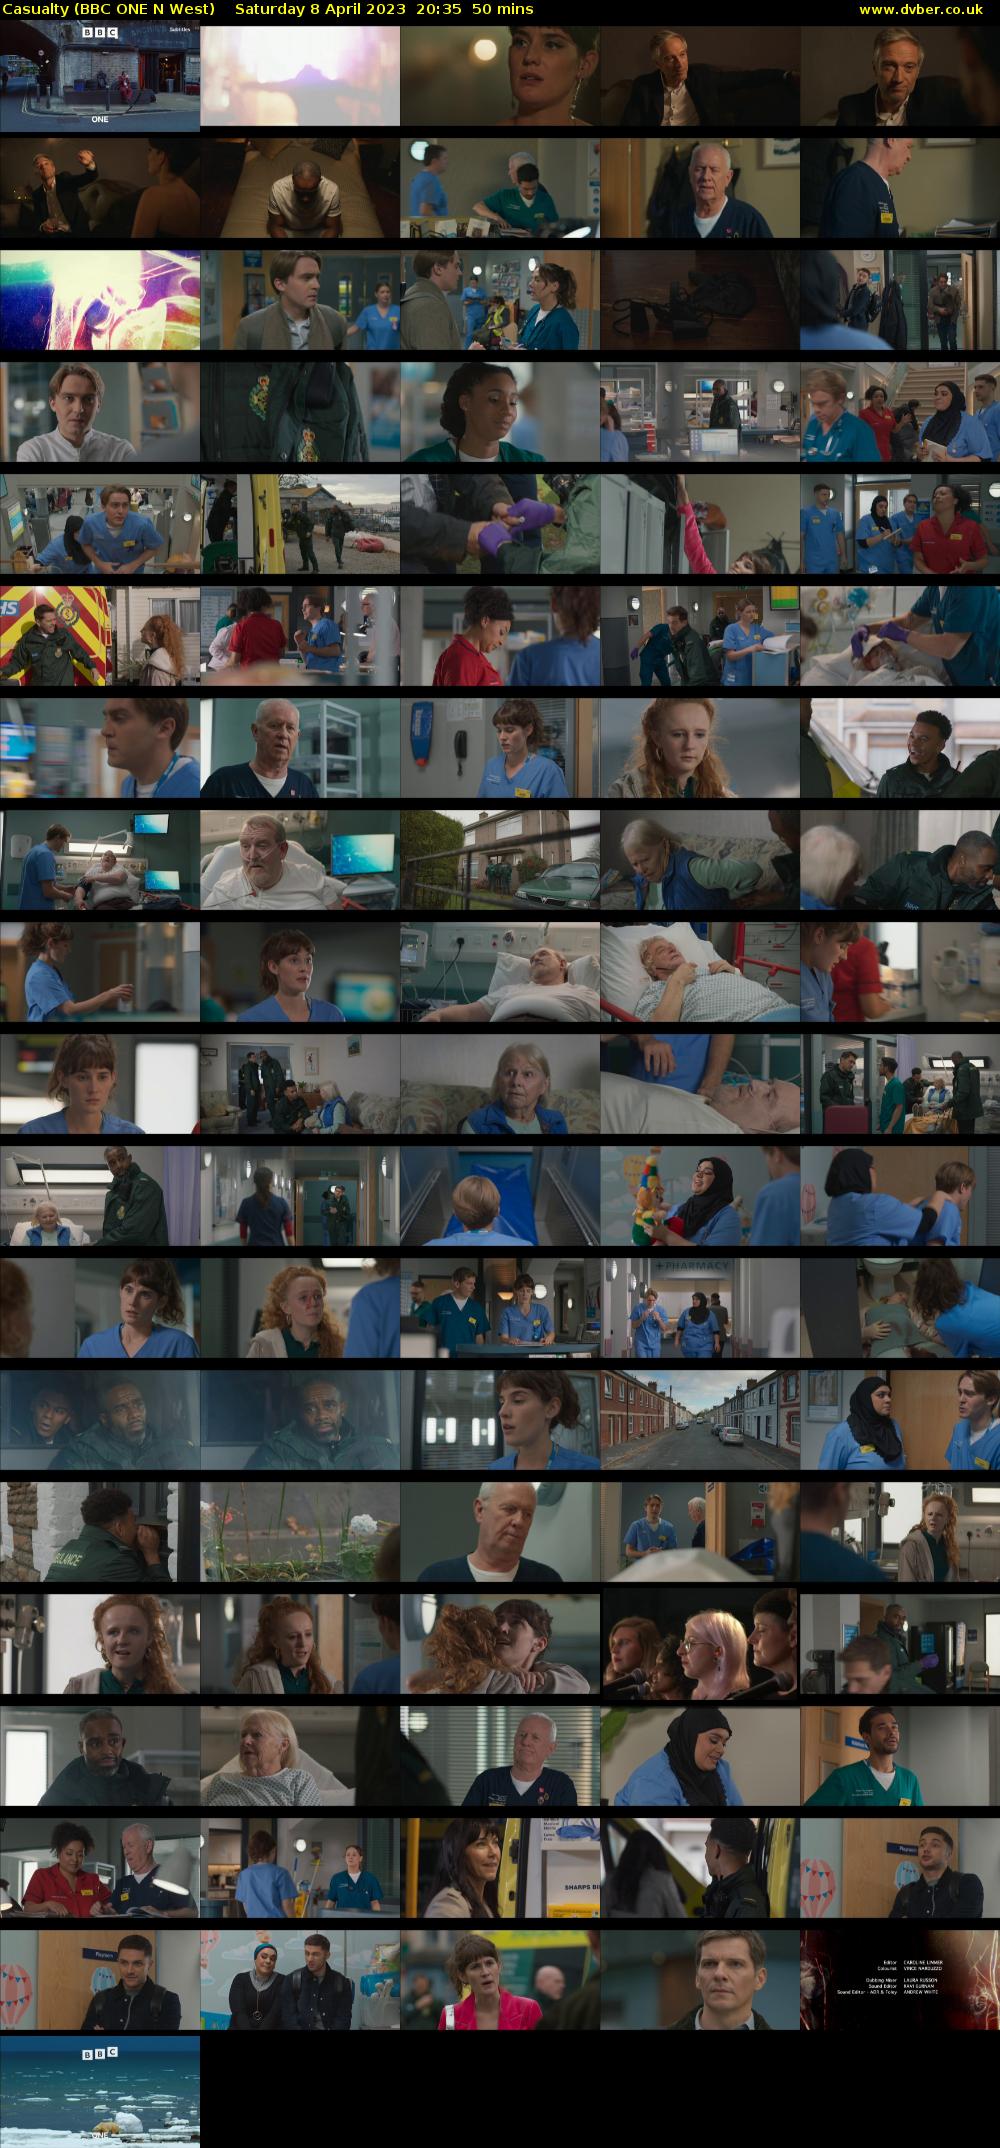 Casualty (BBC ONE N West) Saturday 8 April 2023 20:35 - 21:25